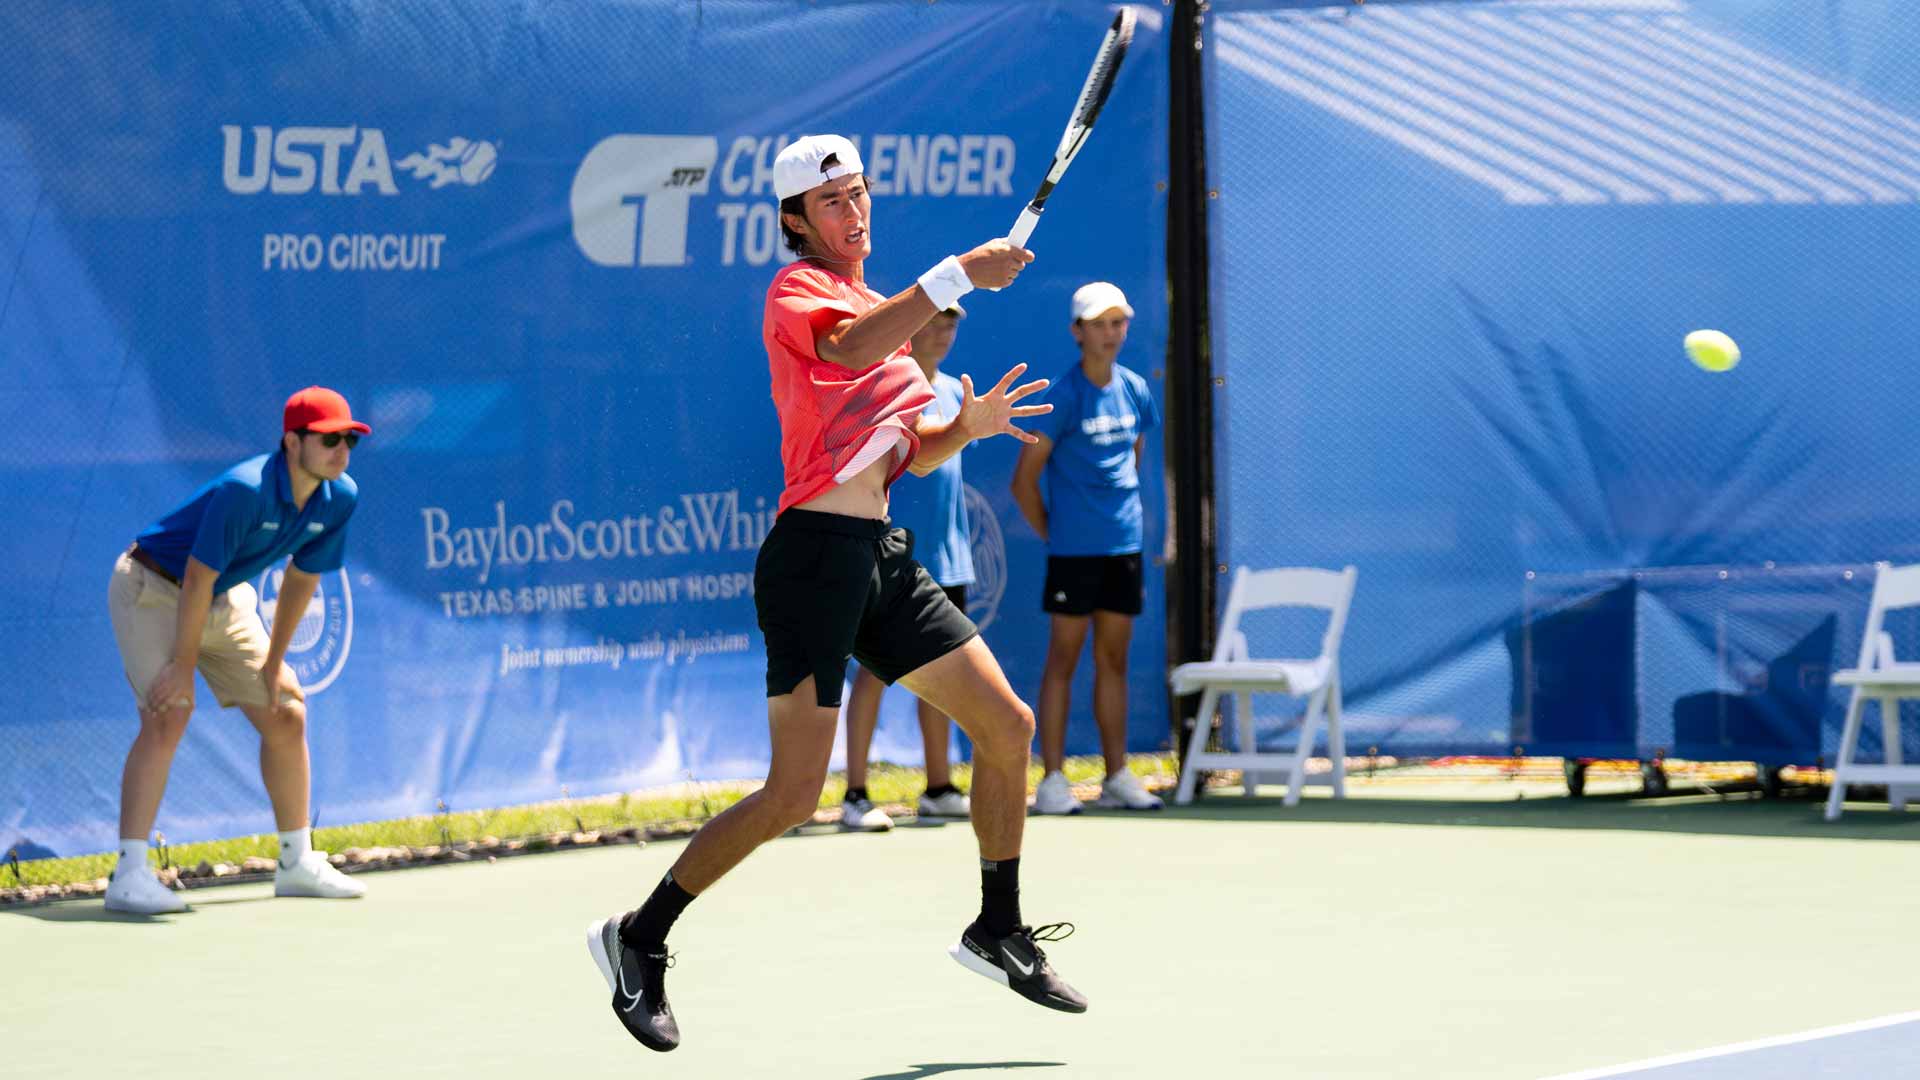 <a href='https://www.atptour.com/en/players/james-trotter/t0bw/overview'>James Trotter</a> at the <a href='https://www.atptour.com/en/scores/archive/tyler/2873/2024/results'>Tyler Tennis Championships</a>, where he won his first ATP Challenger Tour title.